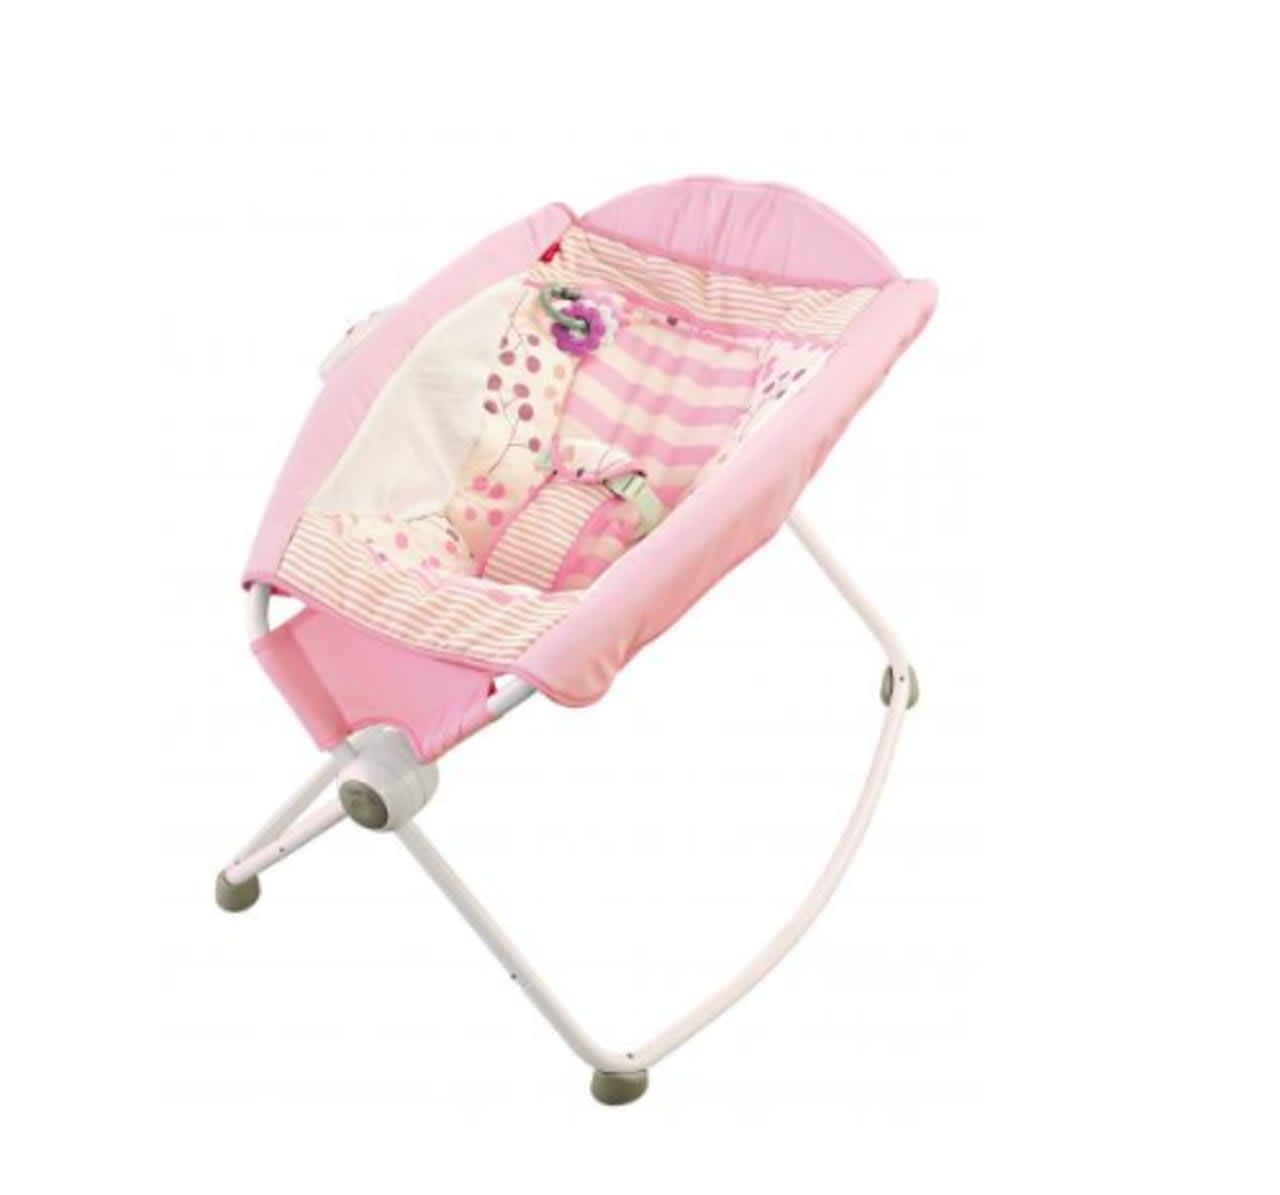 Fisher-Price's Rock ‘n Play infant sleeper.